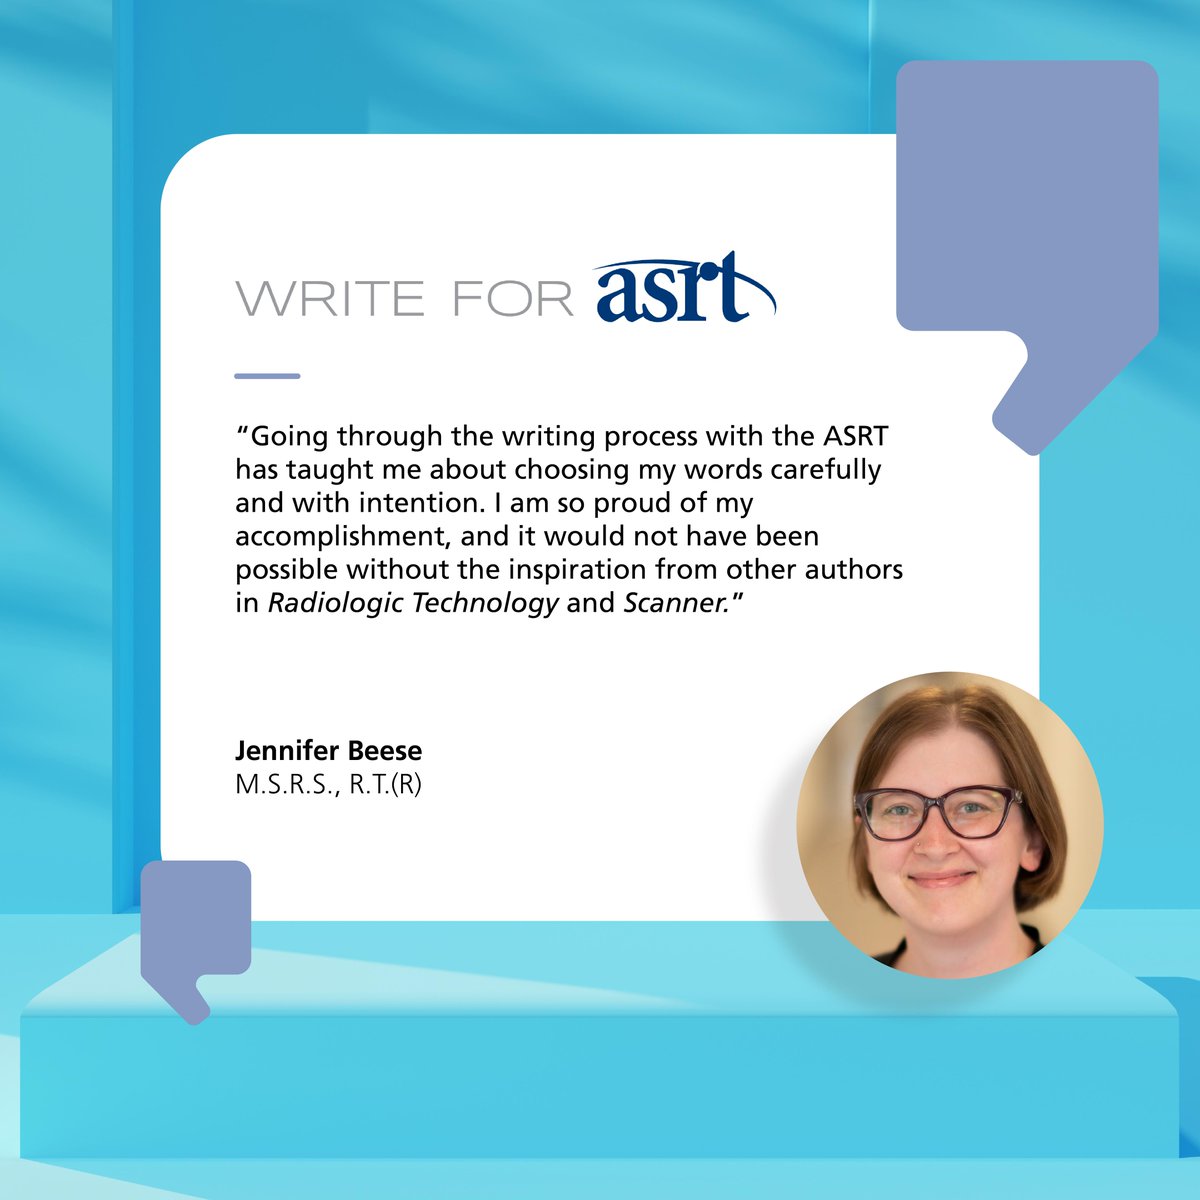 Interested in writing, but not sure where to start? The ASRT staff are here to help, visit this link: asrt.org/main/news-publ….